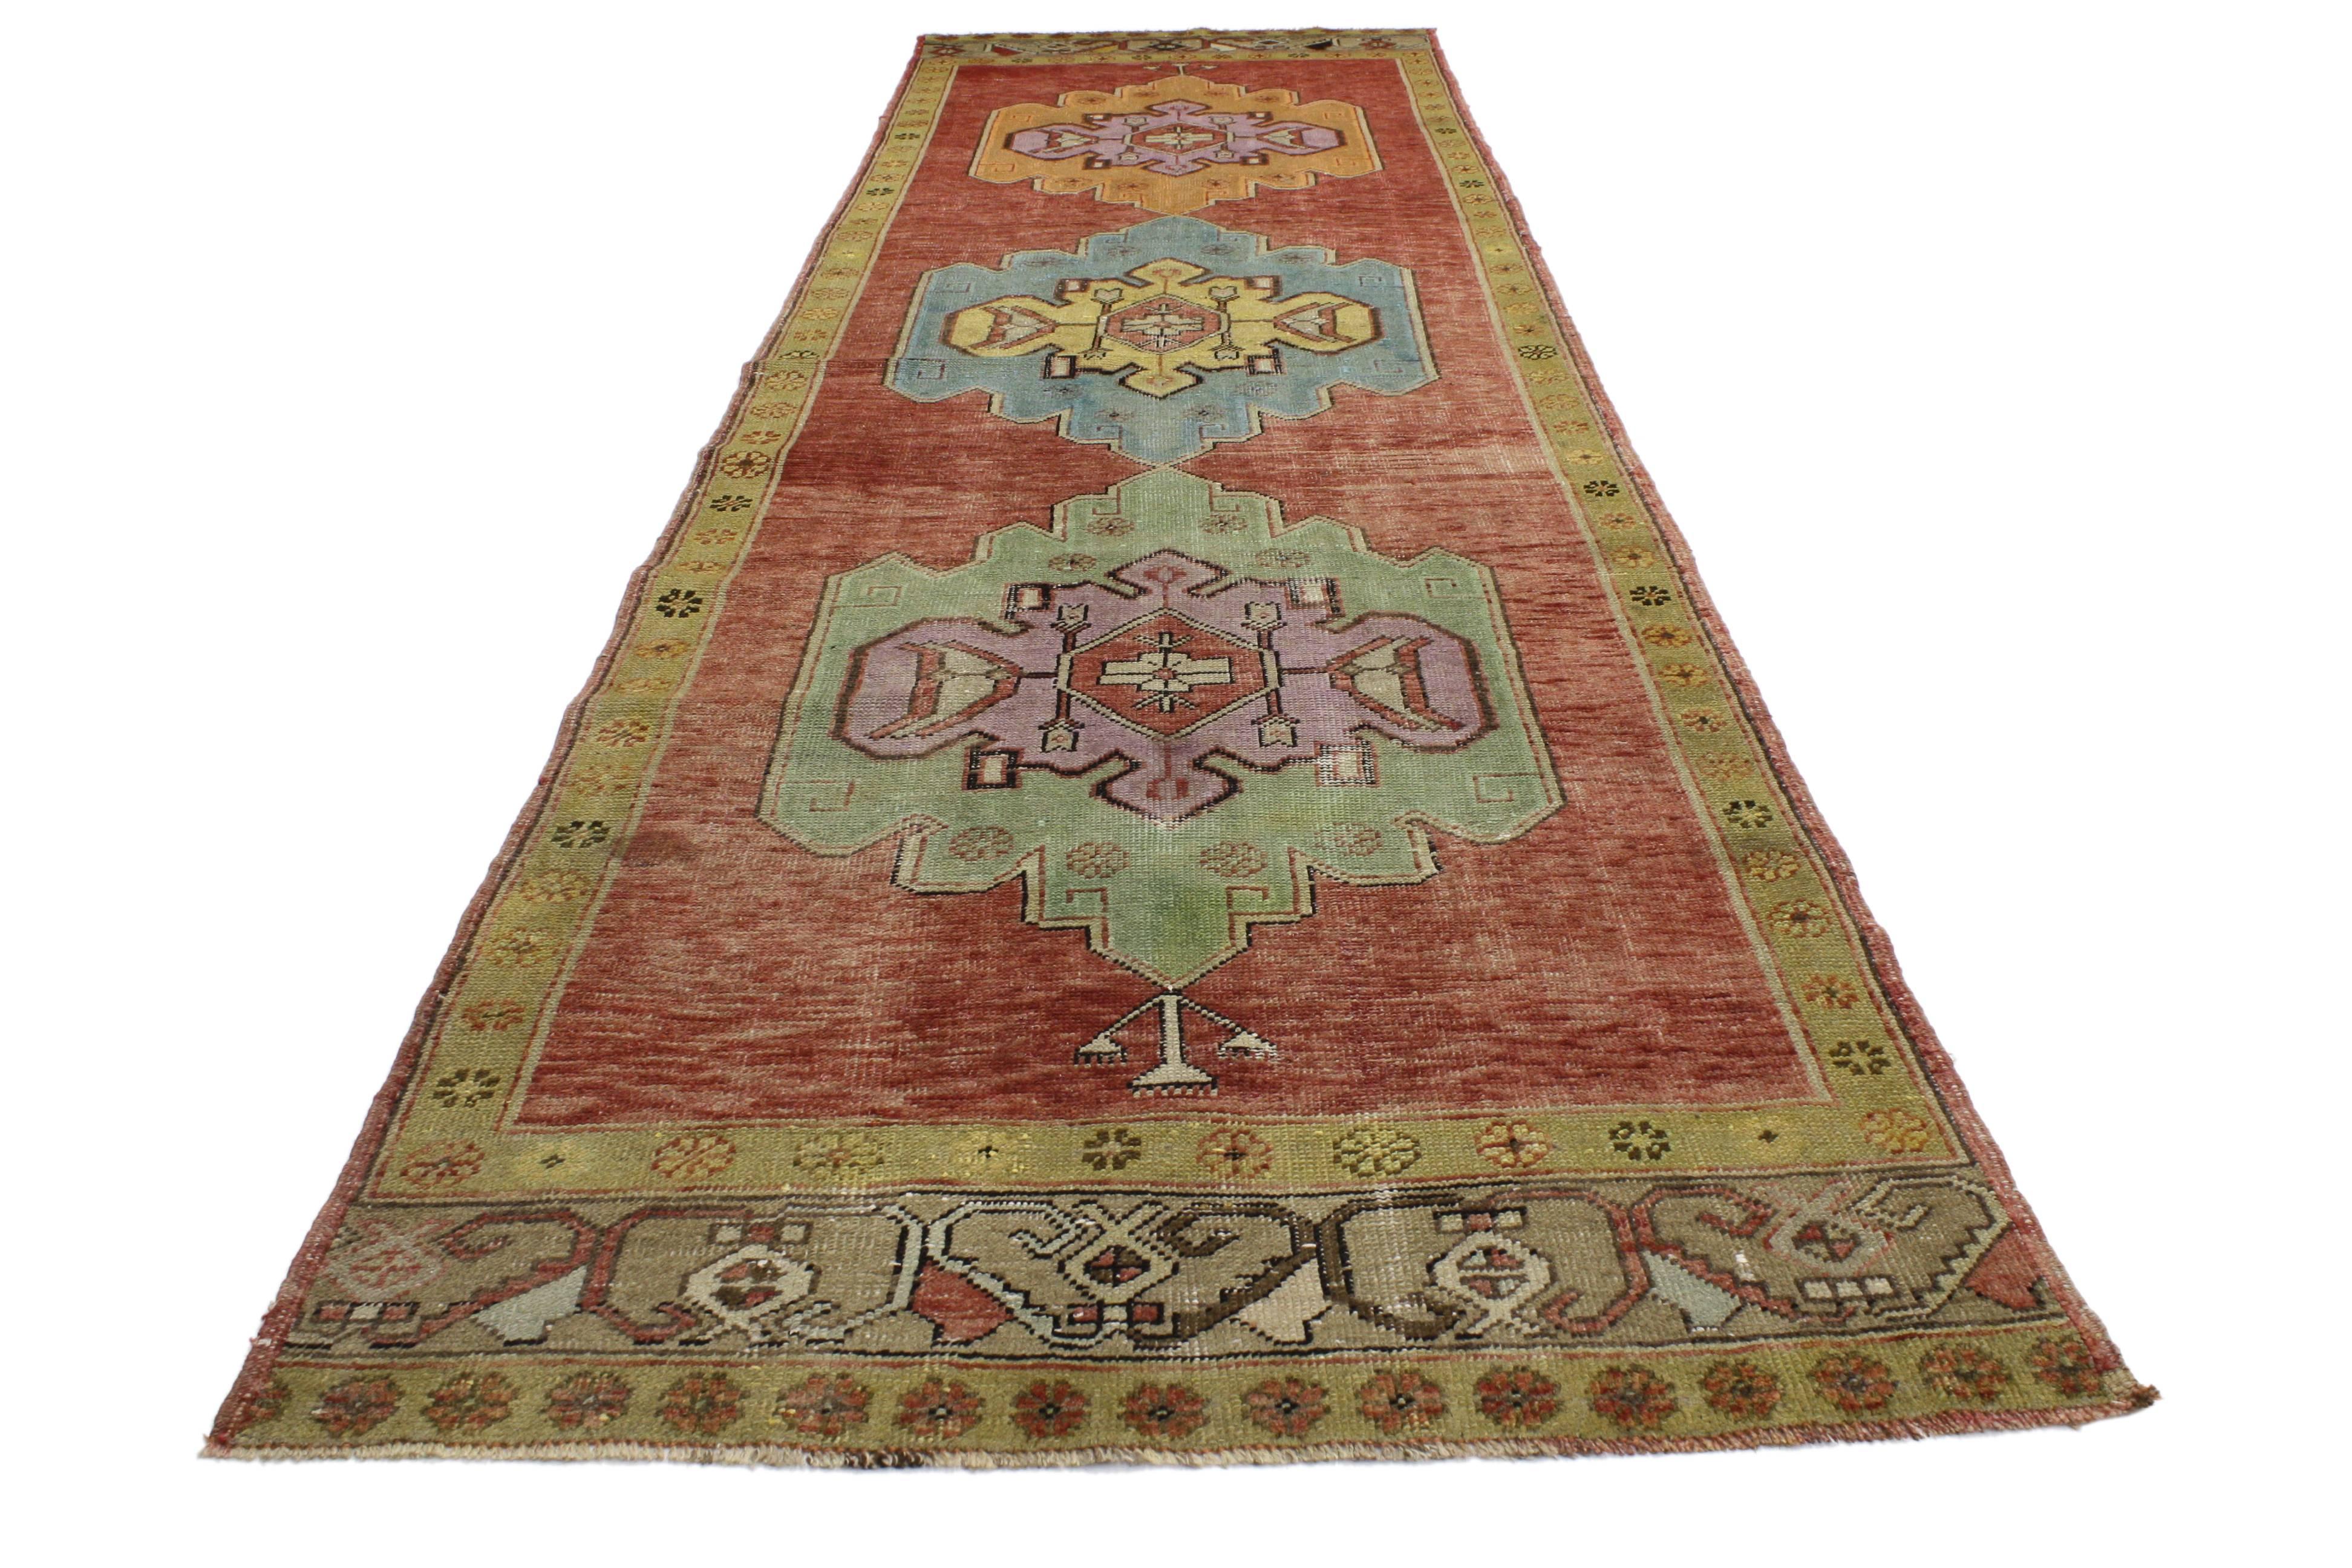 52053 vintage Turkish Oushak runner with modern style. This vintage Turkish Oushak carpet runner with modern style has an eclectic take on a classic design. Immersed in Anatolian history with fashion-forward colors, this vintage Oushak runner nicely